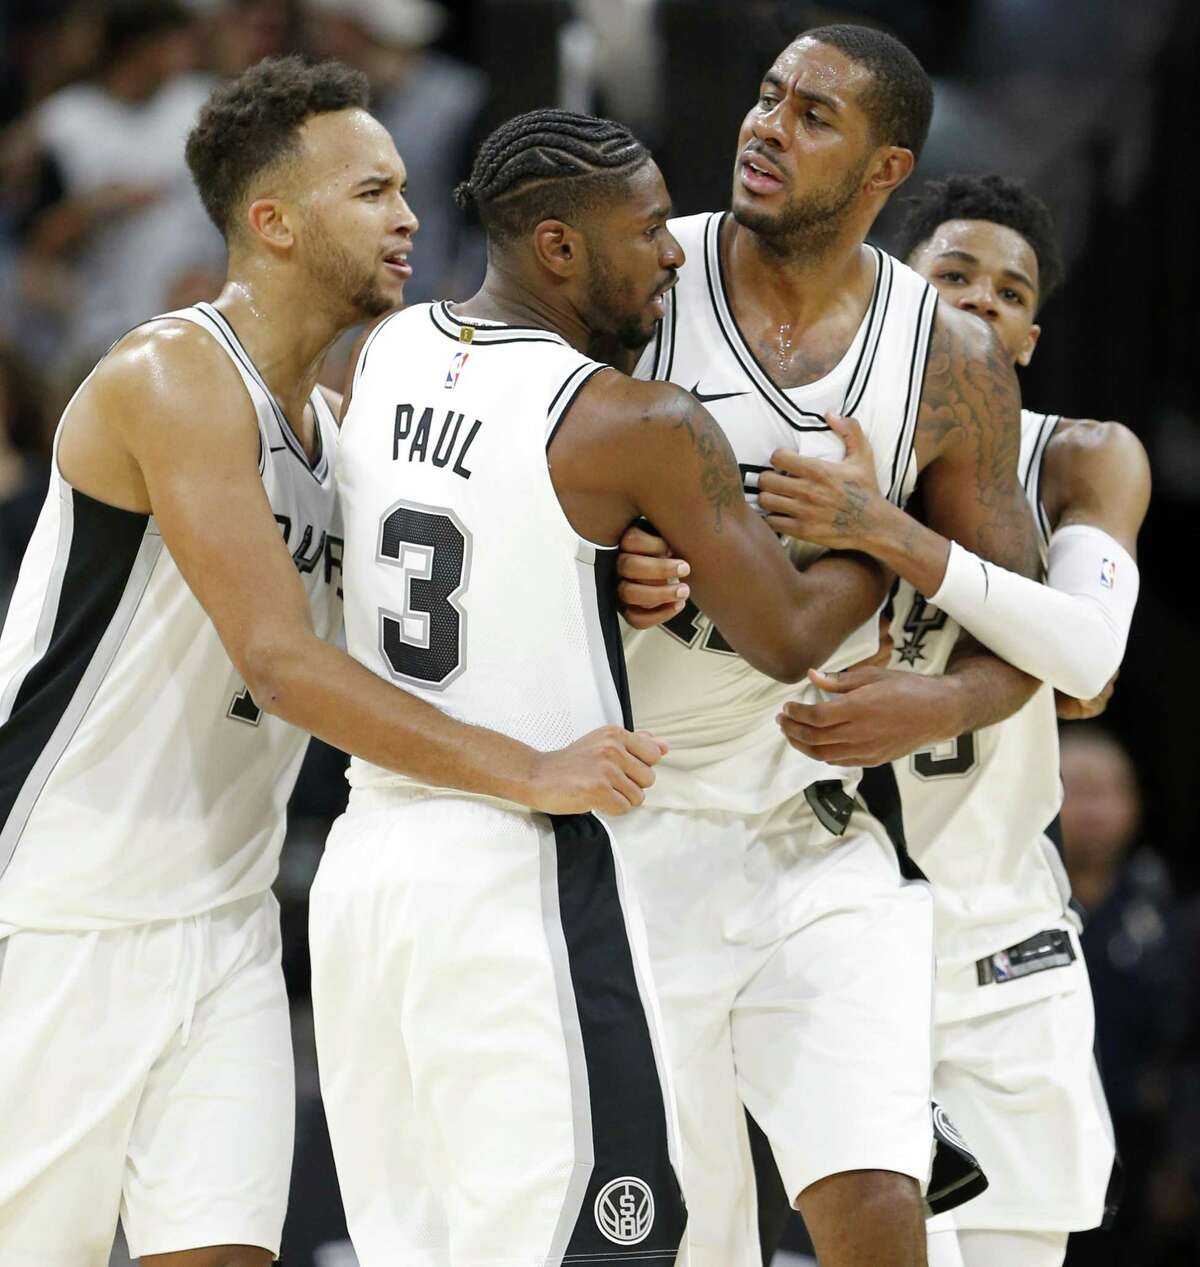 San Antonio SpursÕ LaMarcus Aldridge (center) is separated from Toronto RaptorsÕ Serge Ibaka (not pictured) by teammates San Antonio SpursÕ Kyle Anderson (from left), Brandon Paul, and Dejounte Murray during second half action Monday Oct. 23, 2017 at the AT&T Center. Aldridge and Ibaka received technicals on the play. The Spurs won 101-97.